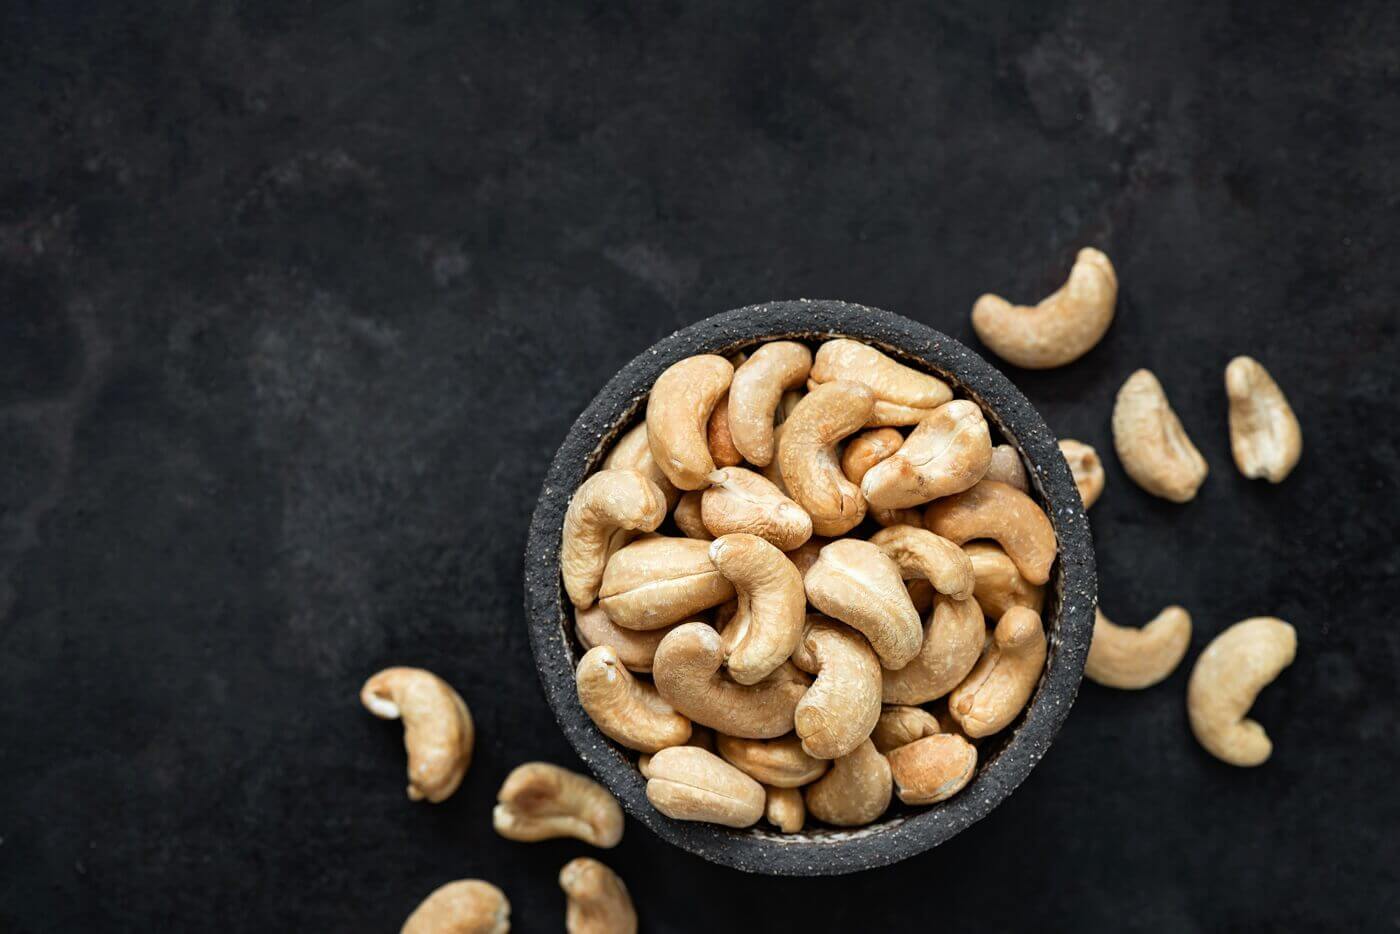 Why are cashews so expensive?